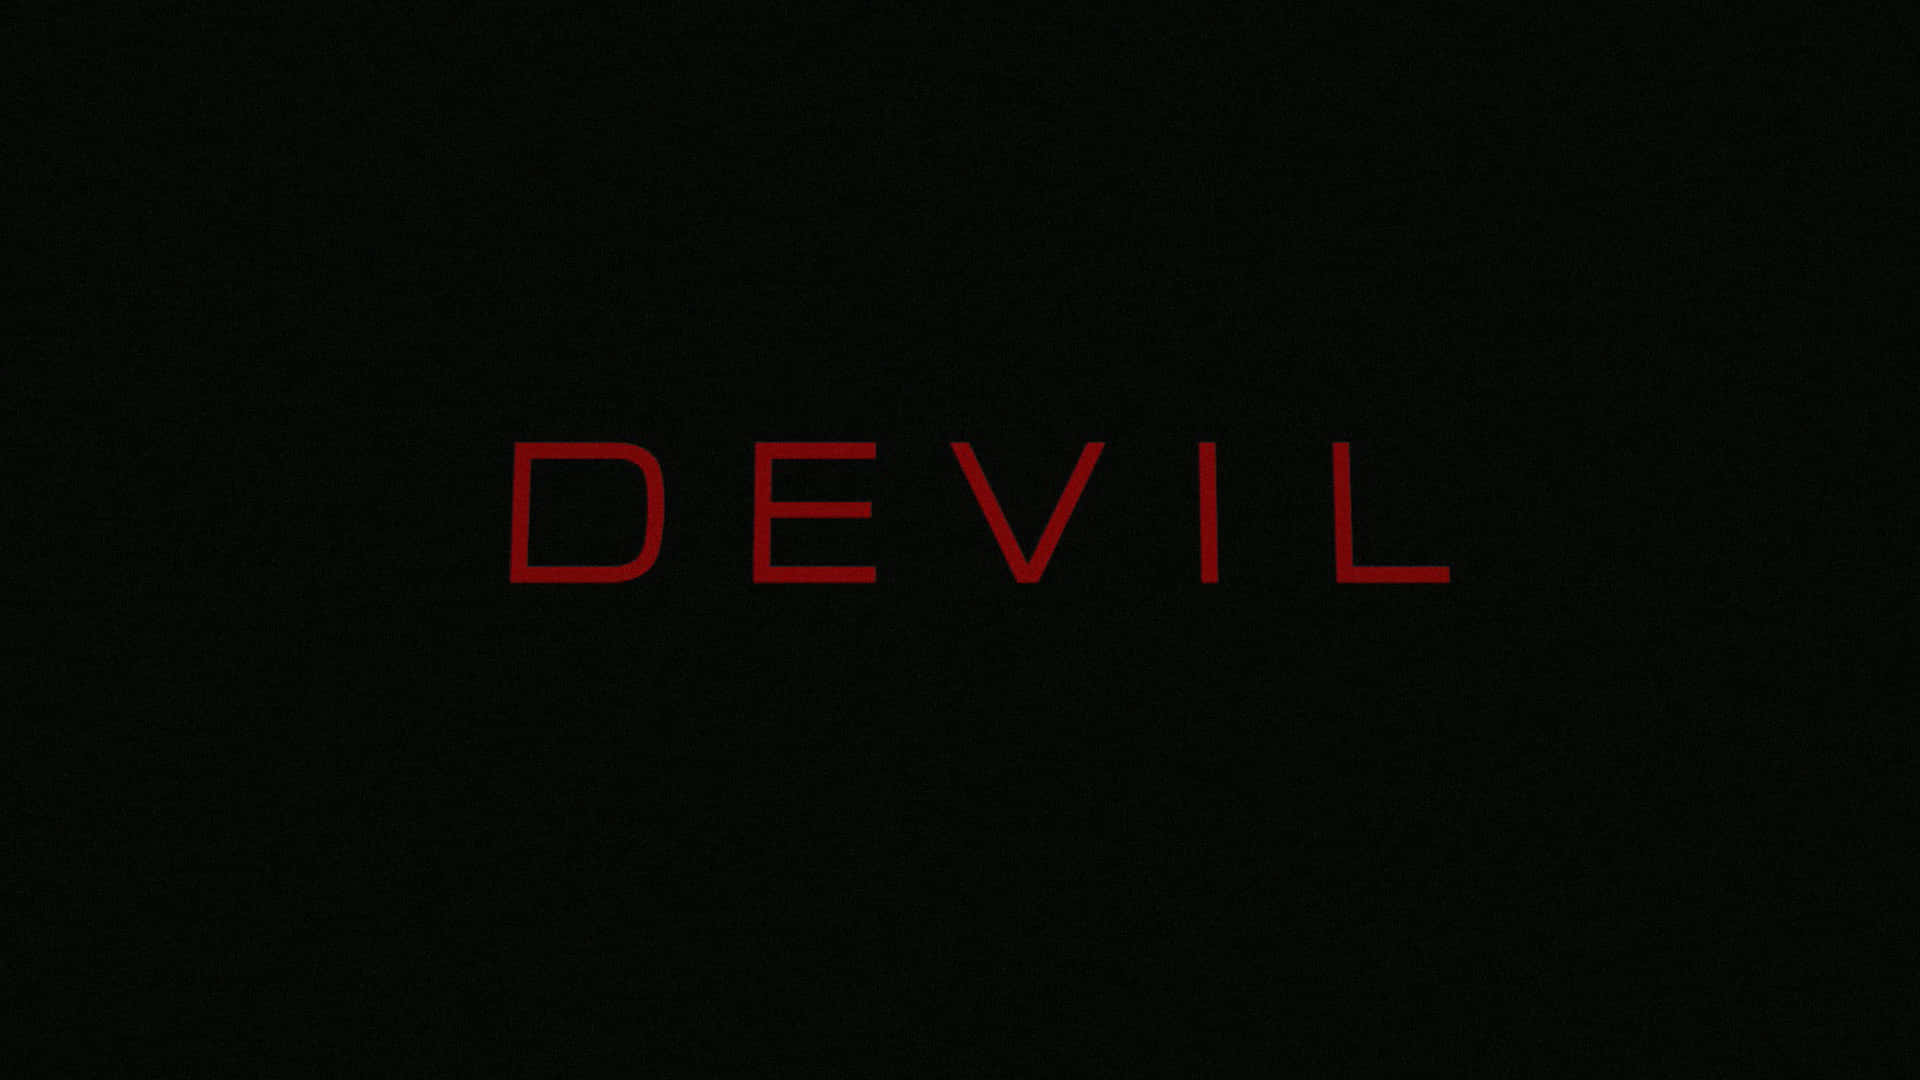 Devil - A Black Background With Red Letters